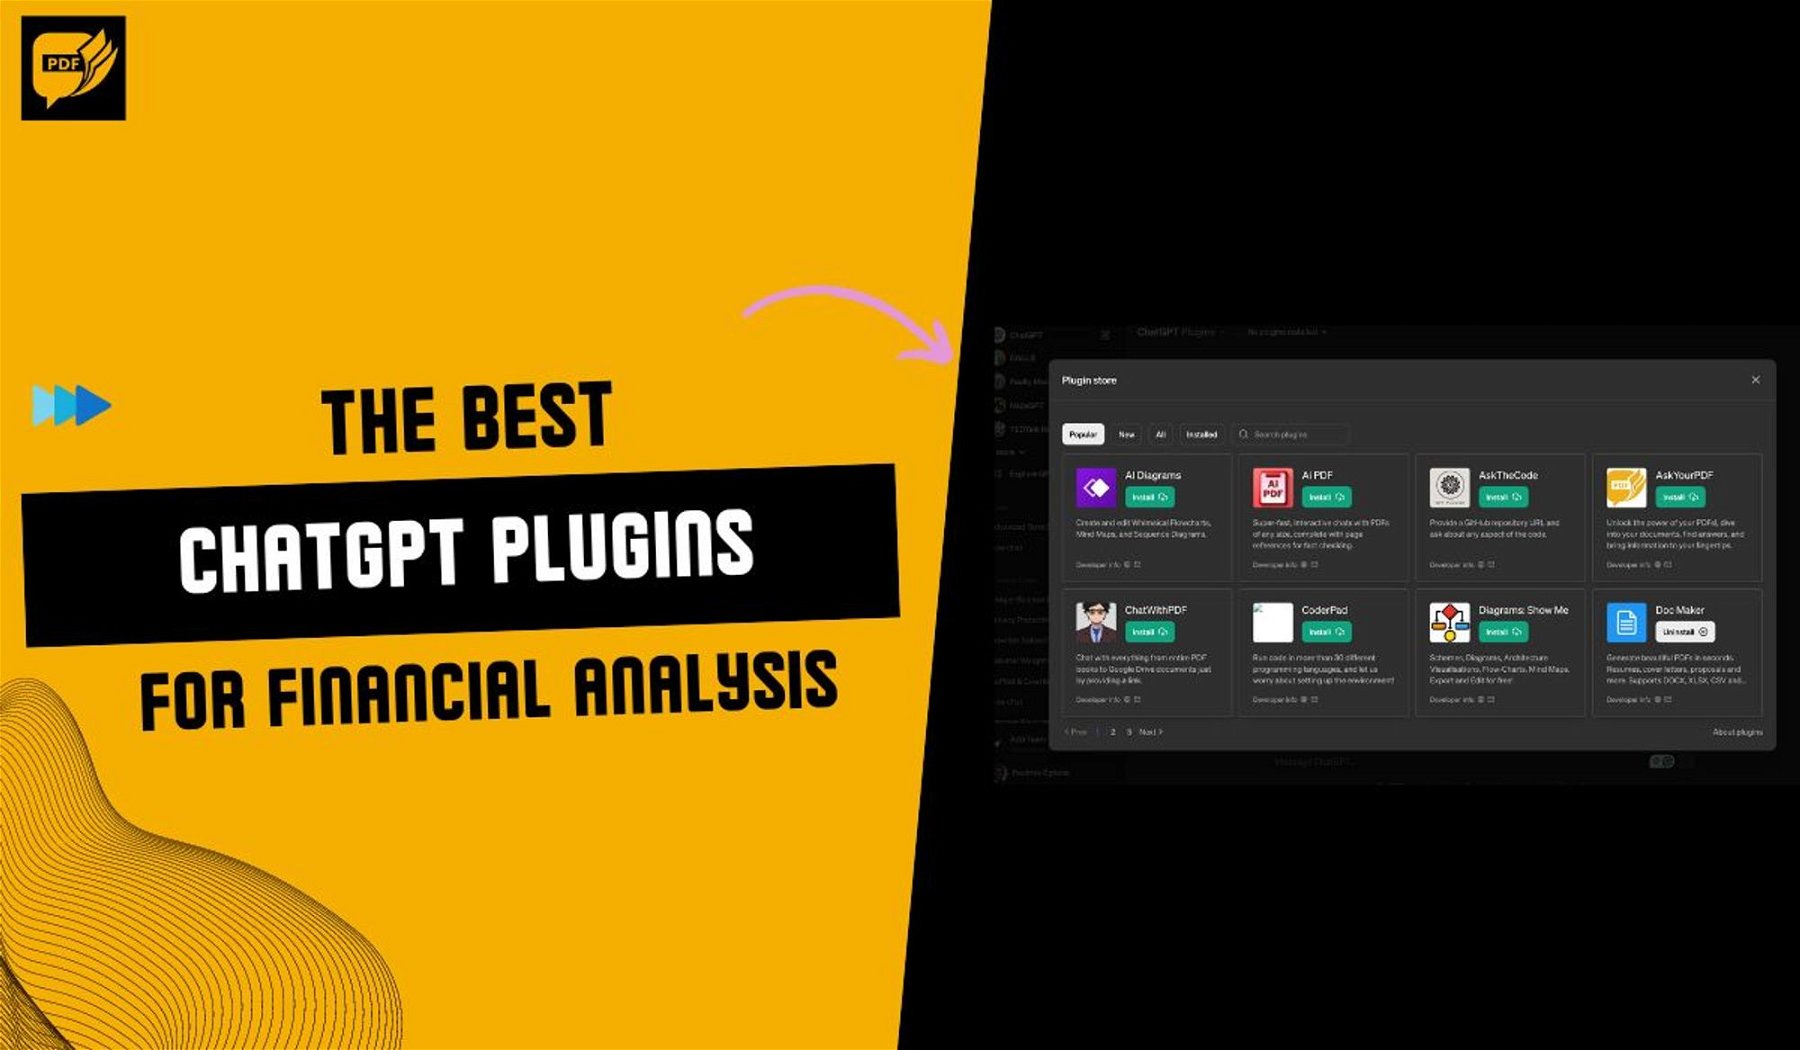 The Best ChatGPT Plugins for Financial Analysis